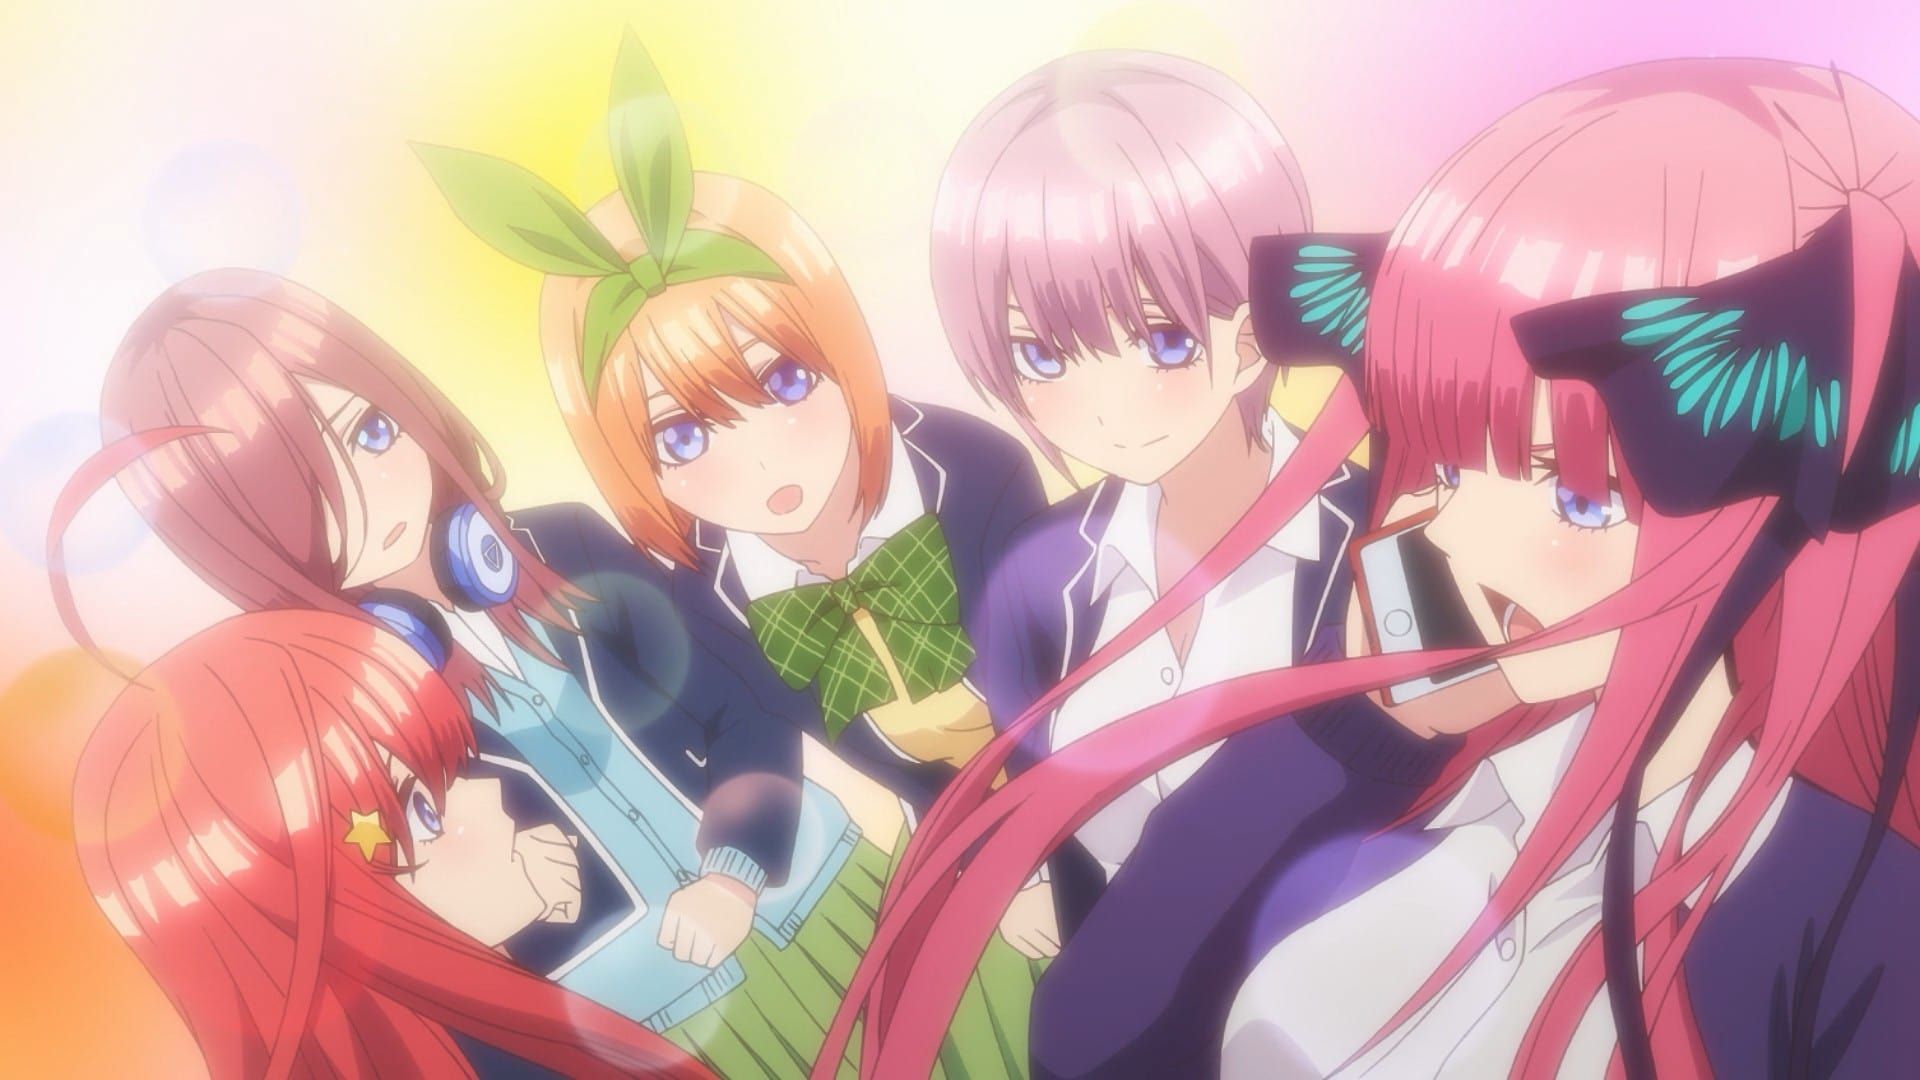 The Quintessential Quintuplets background